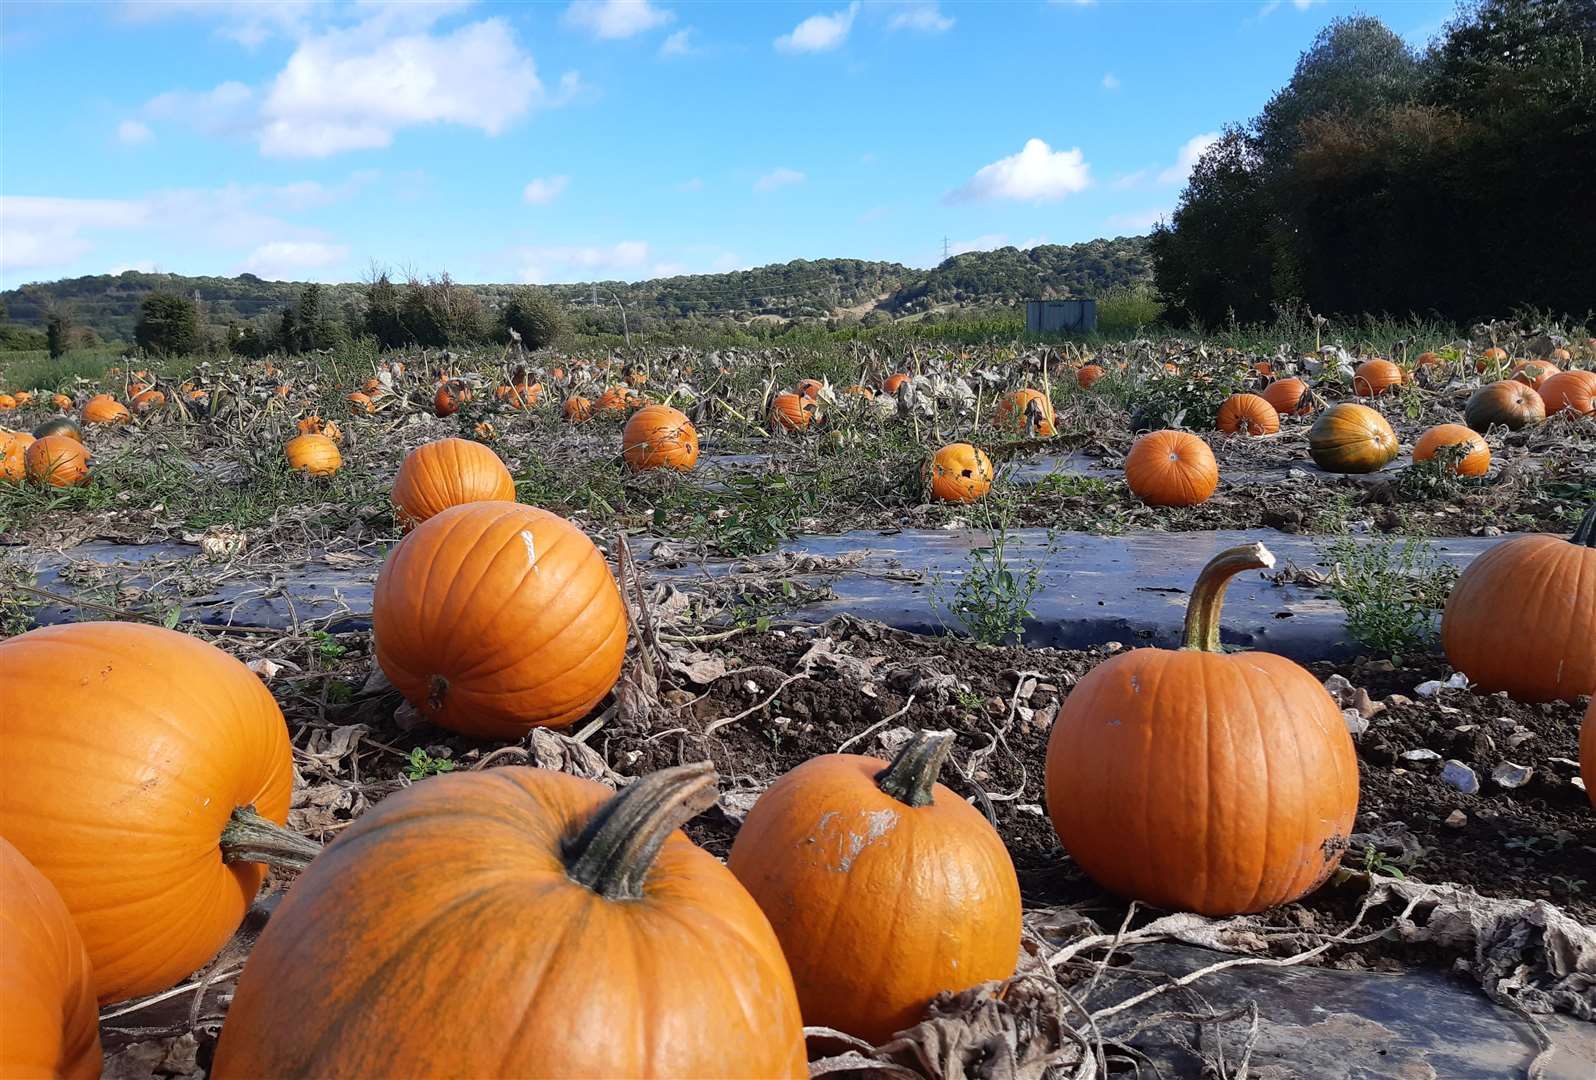 Picking your own pumpkin has been growing in popularity over the years